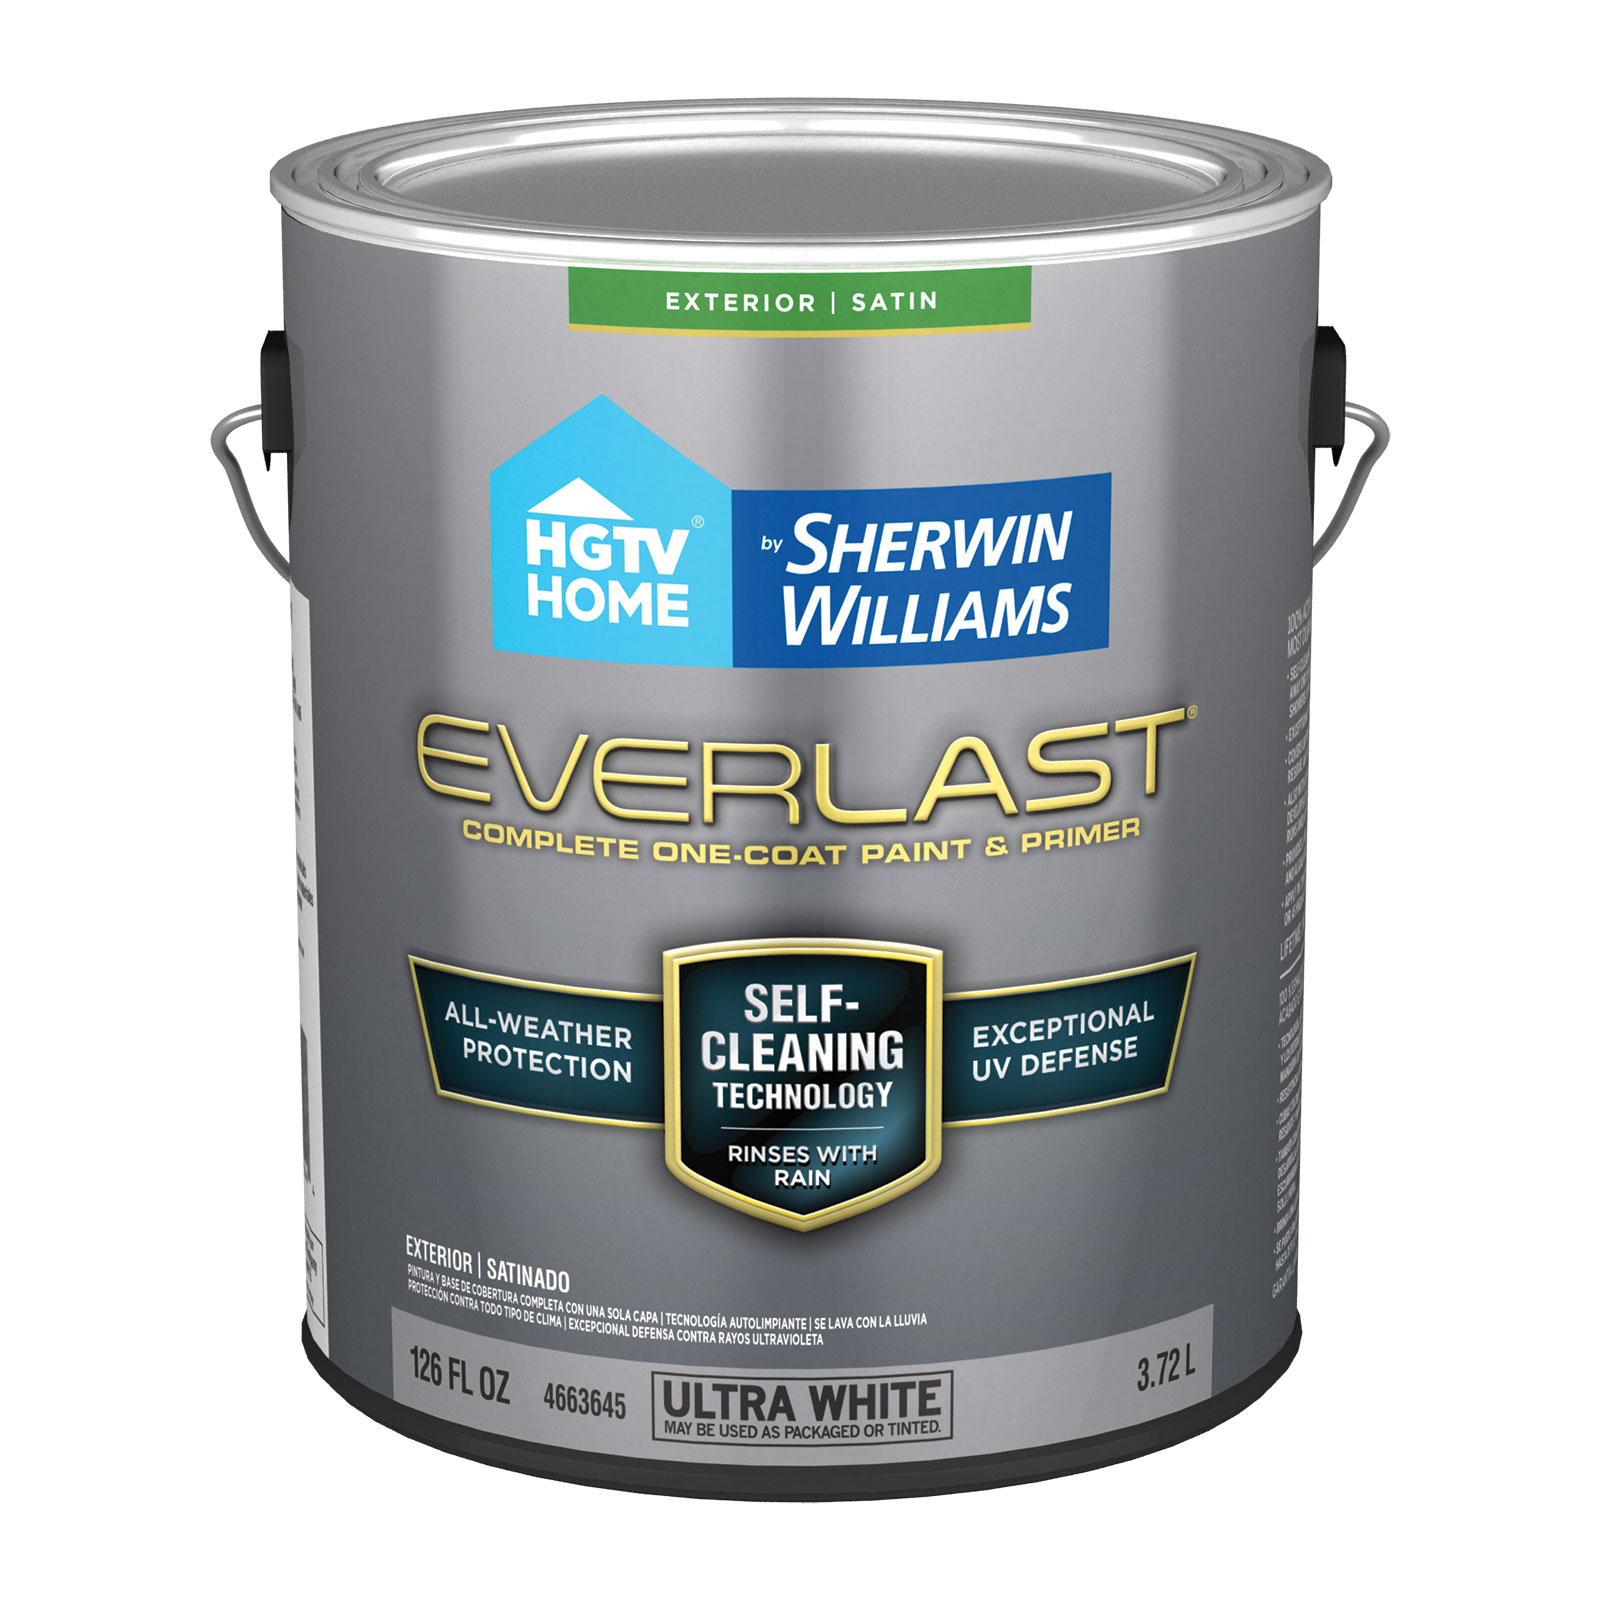 Hgtv Home By Sherwin Williams Exterior Paint At Lowes Com